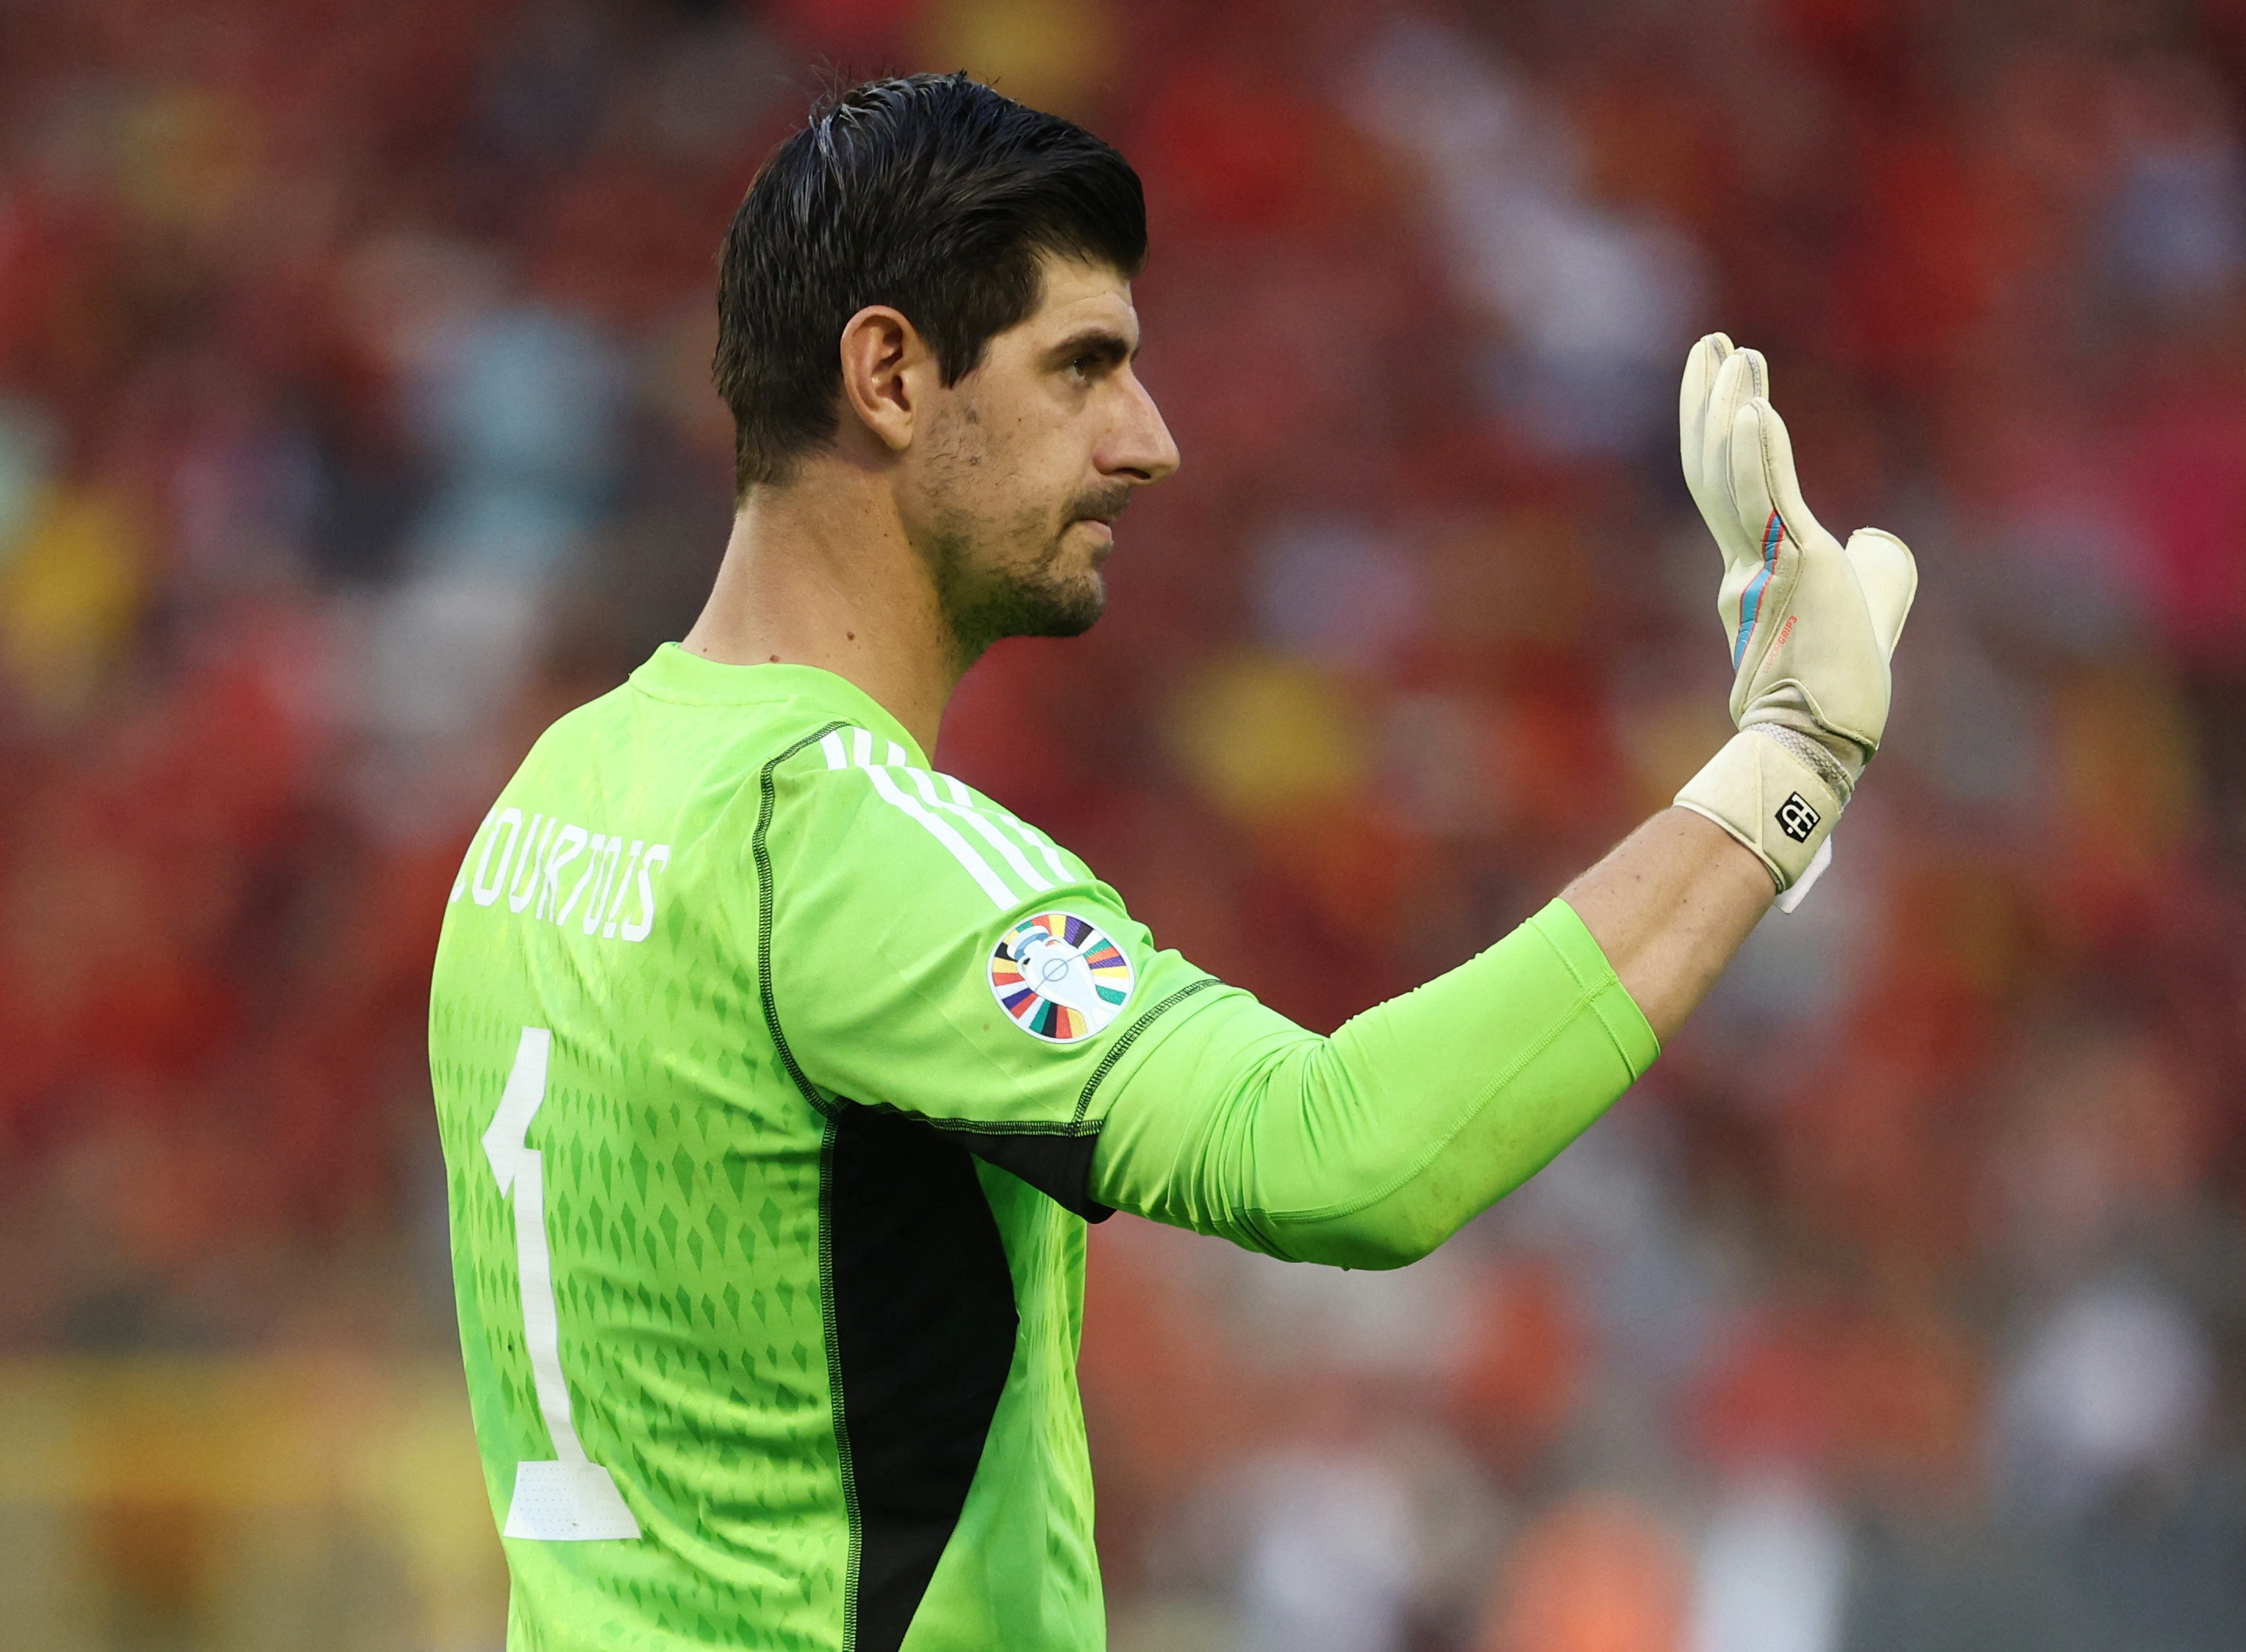 Belgium's Courtois 'deeply disappointed' by Tedesco's remarks Reuters